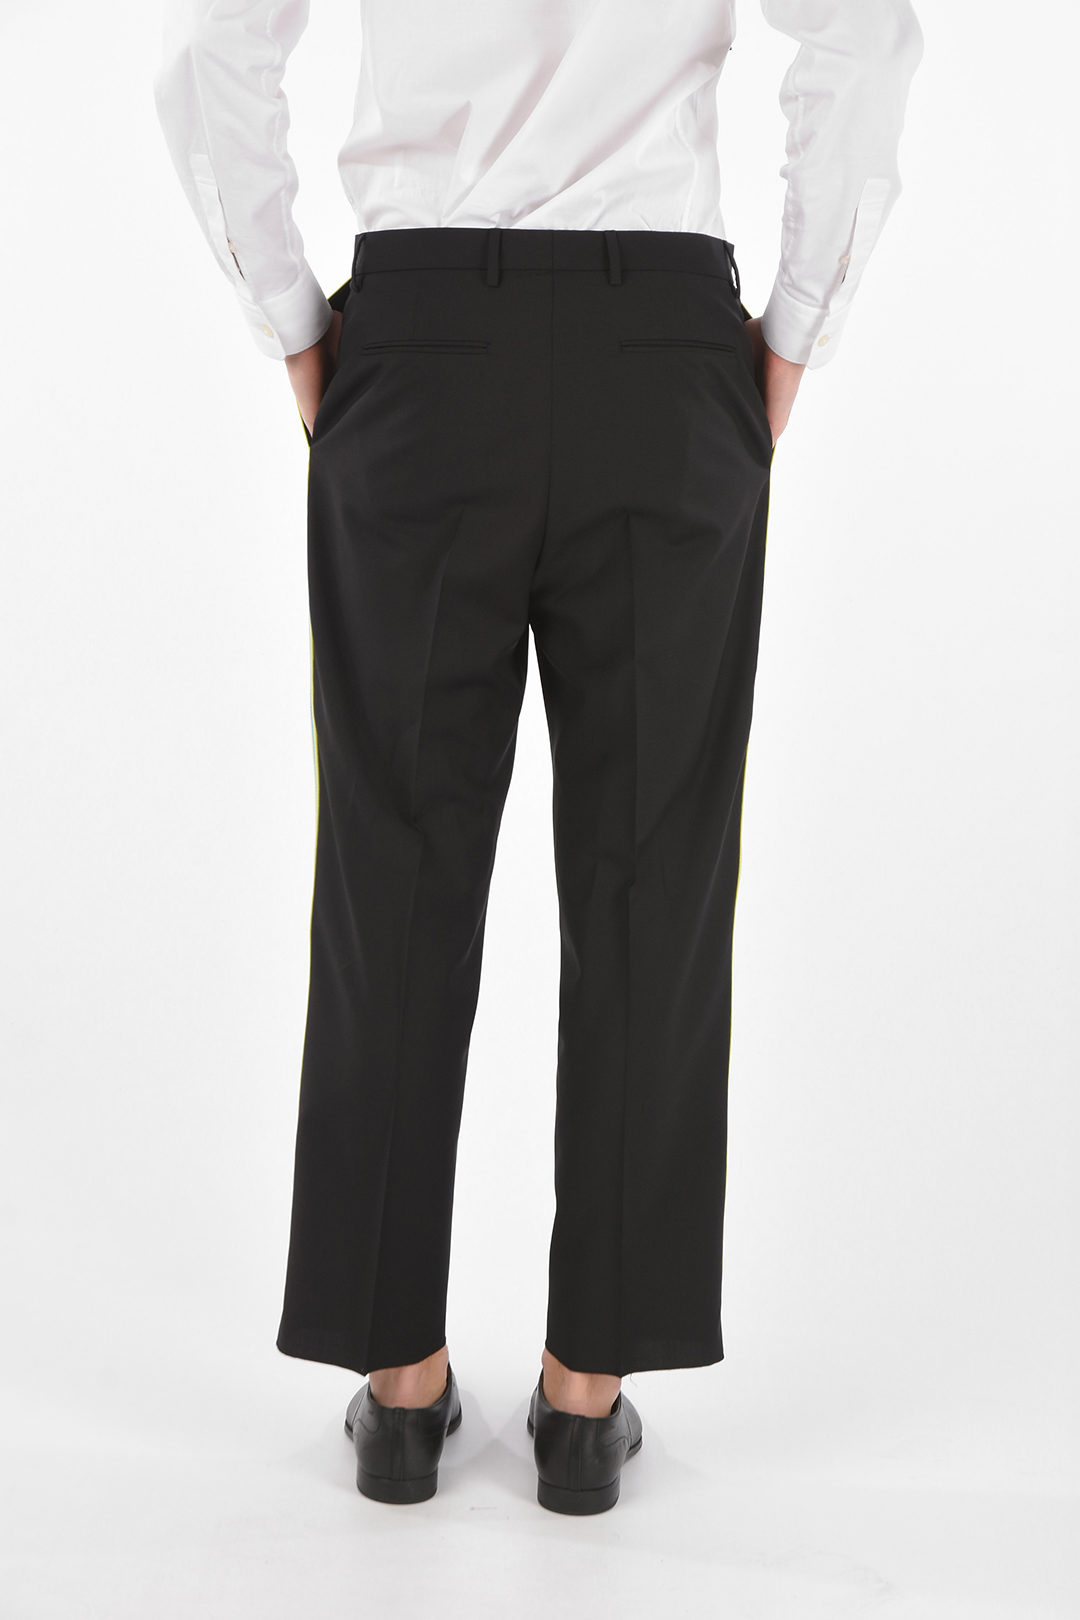 Valentino Side Contrasting Band STRAIGHT FIT Pants men - Glamood Outlet